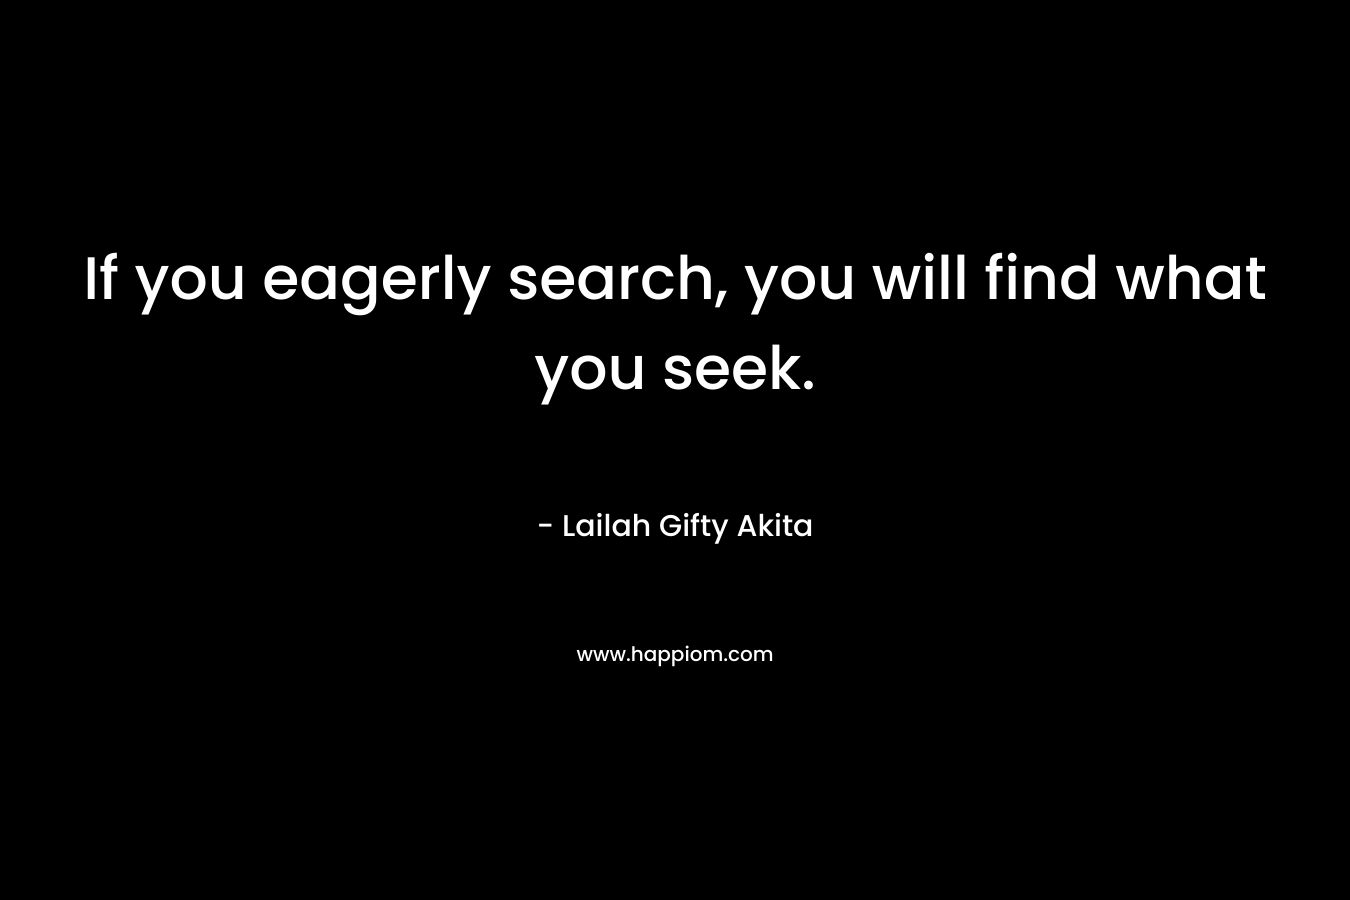 If you eagerly search, you will find what you seek.